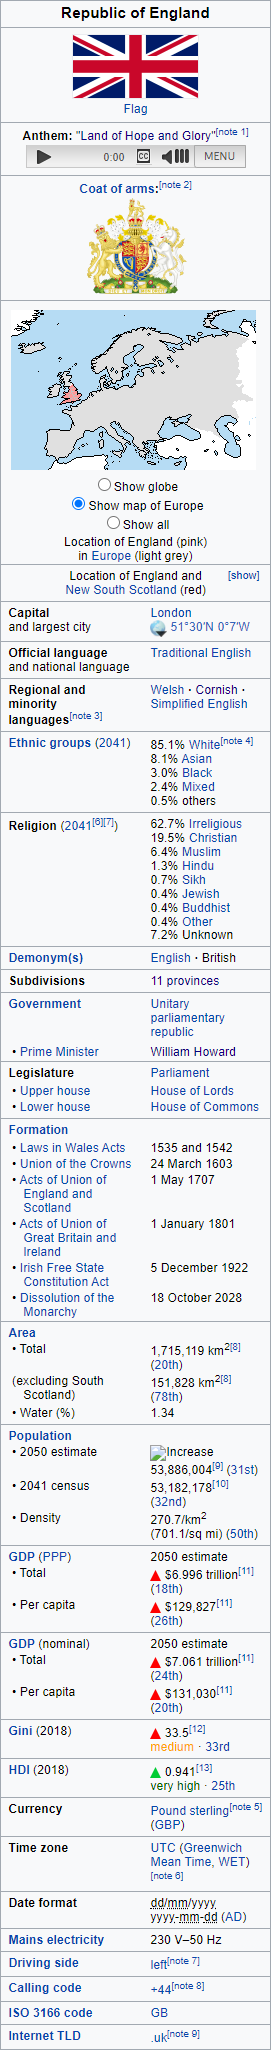 england wikibox 1.PNG